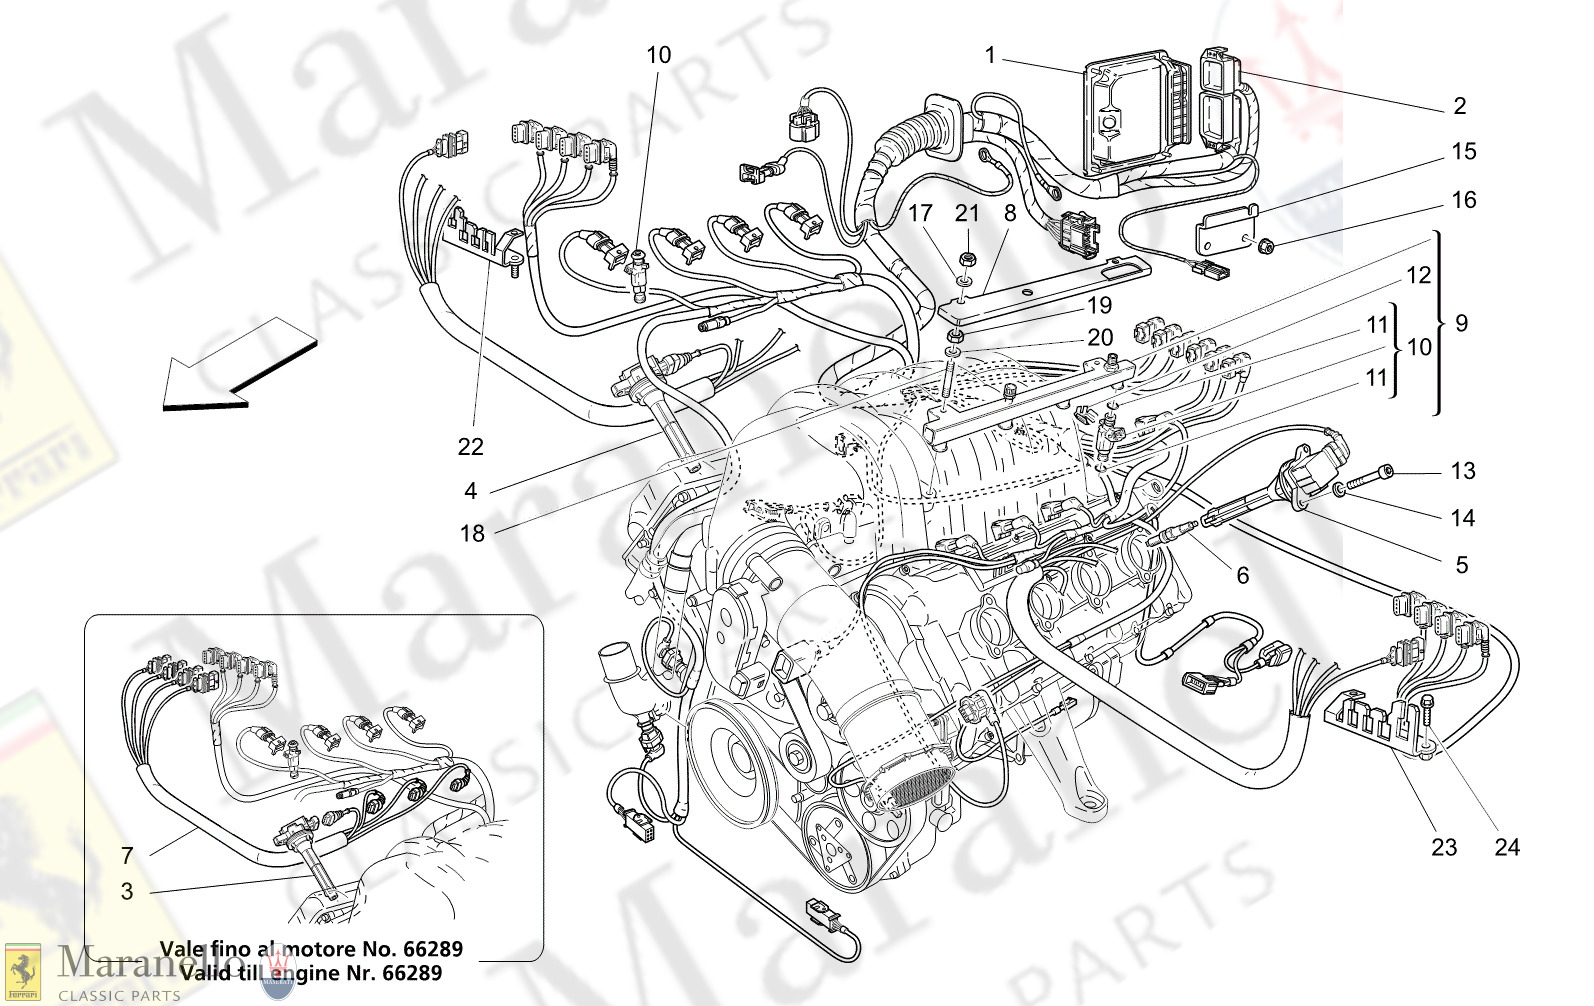 M1.90 - 11 - M190 - 11 Injection - Ignition Device